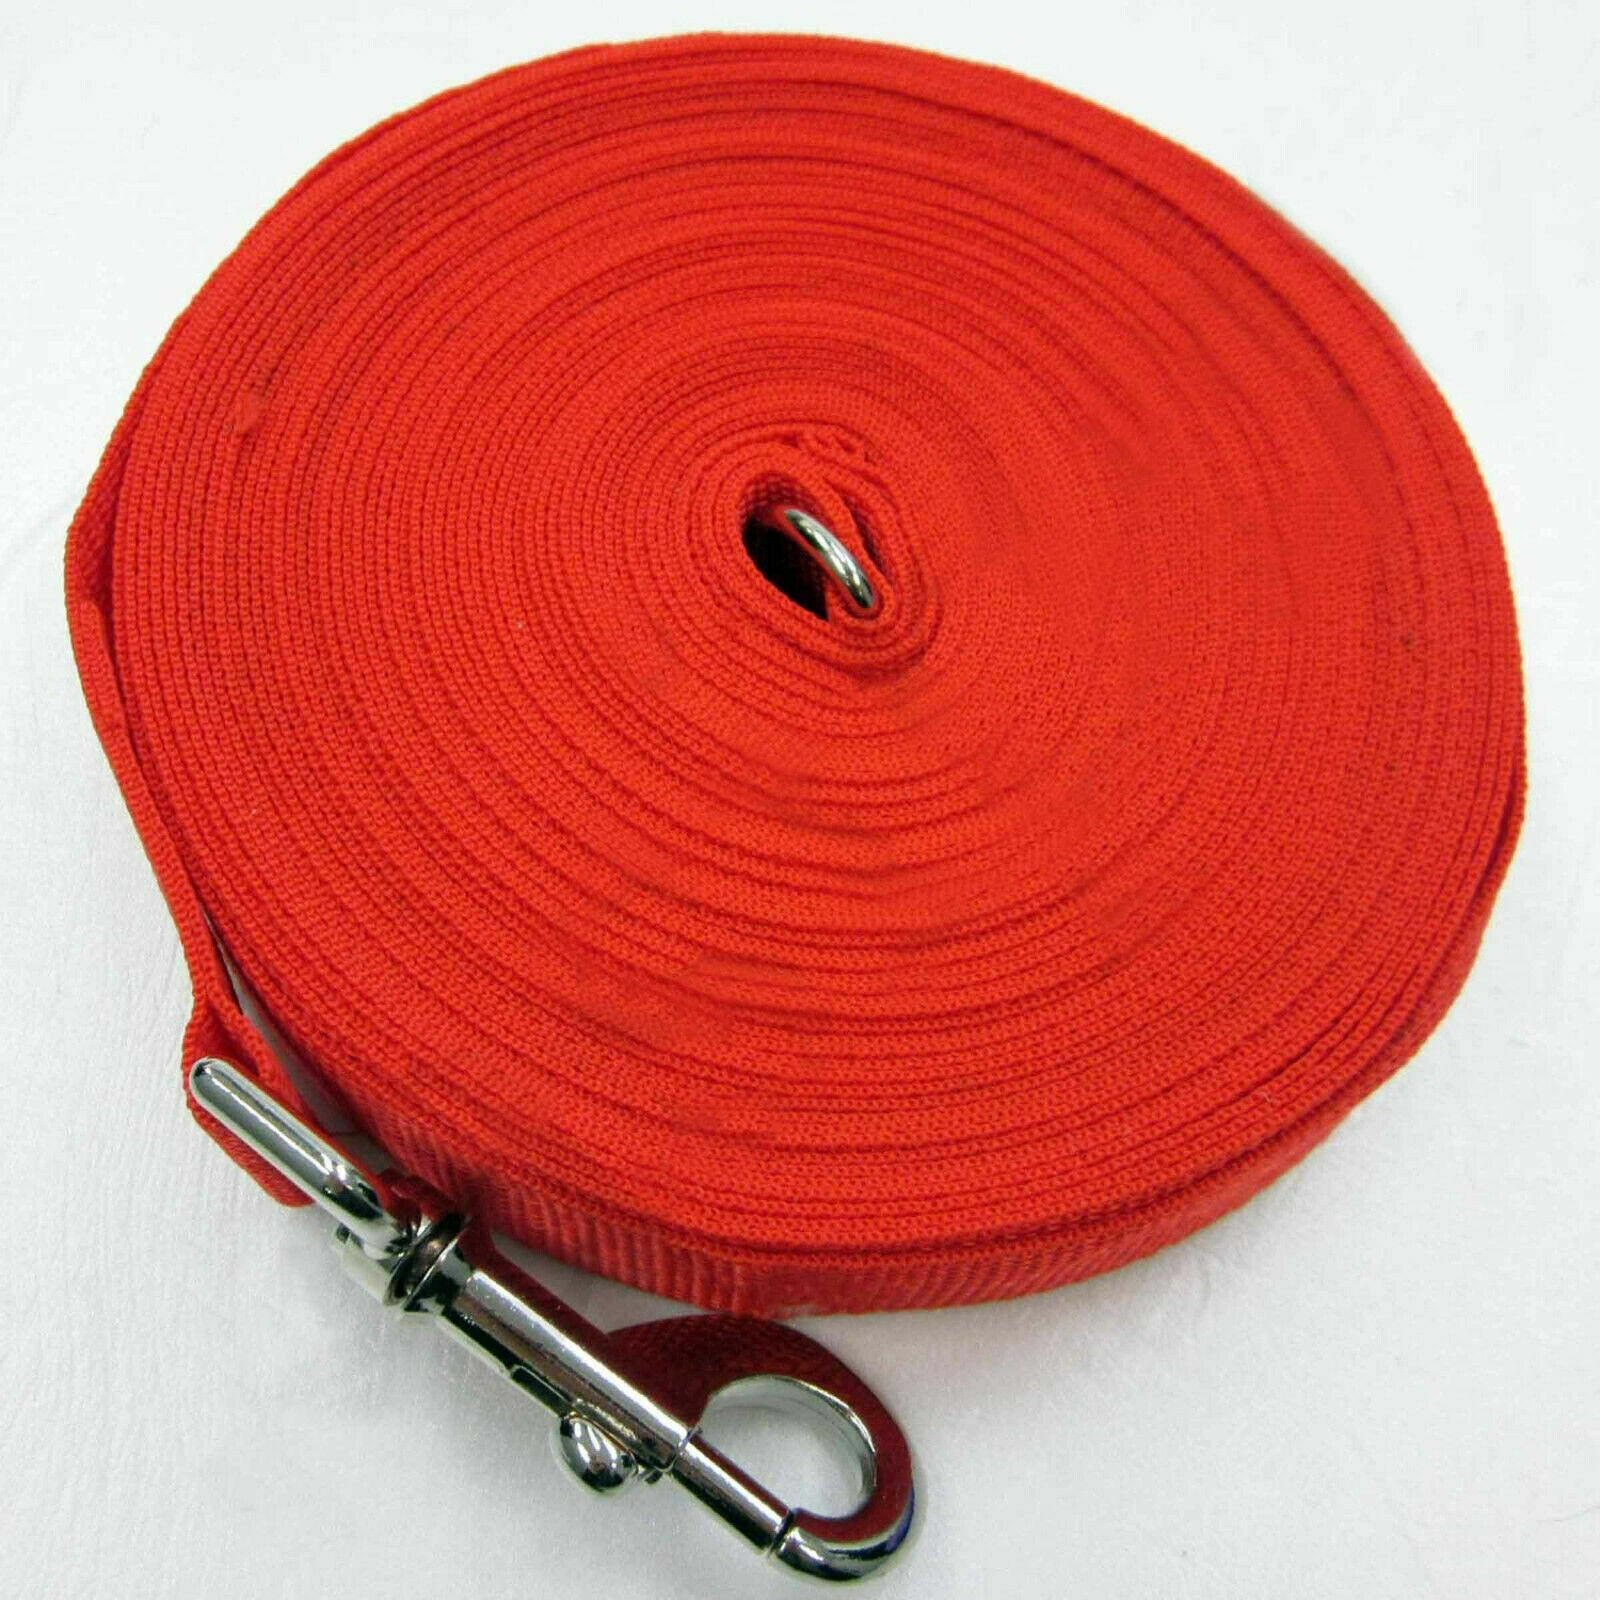 15m Red Pet Dog Puppy Training Lead Leash Collar Lead Harness Strong Long Line Rope